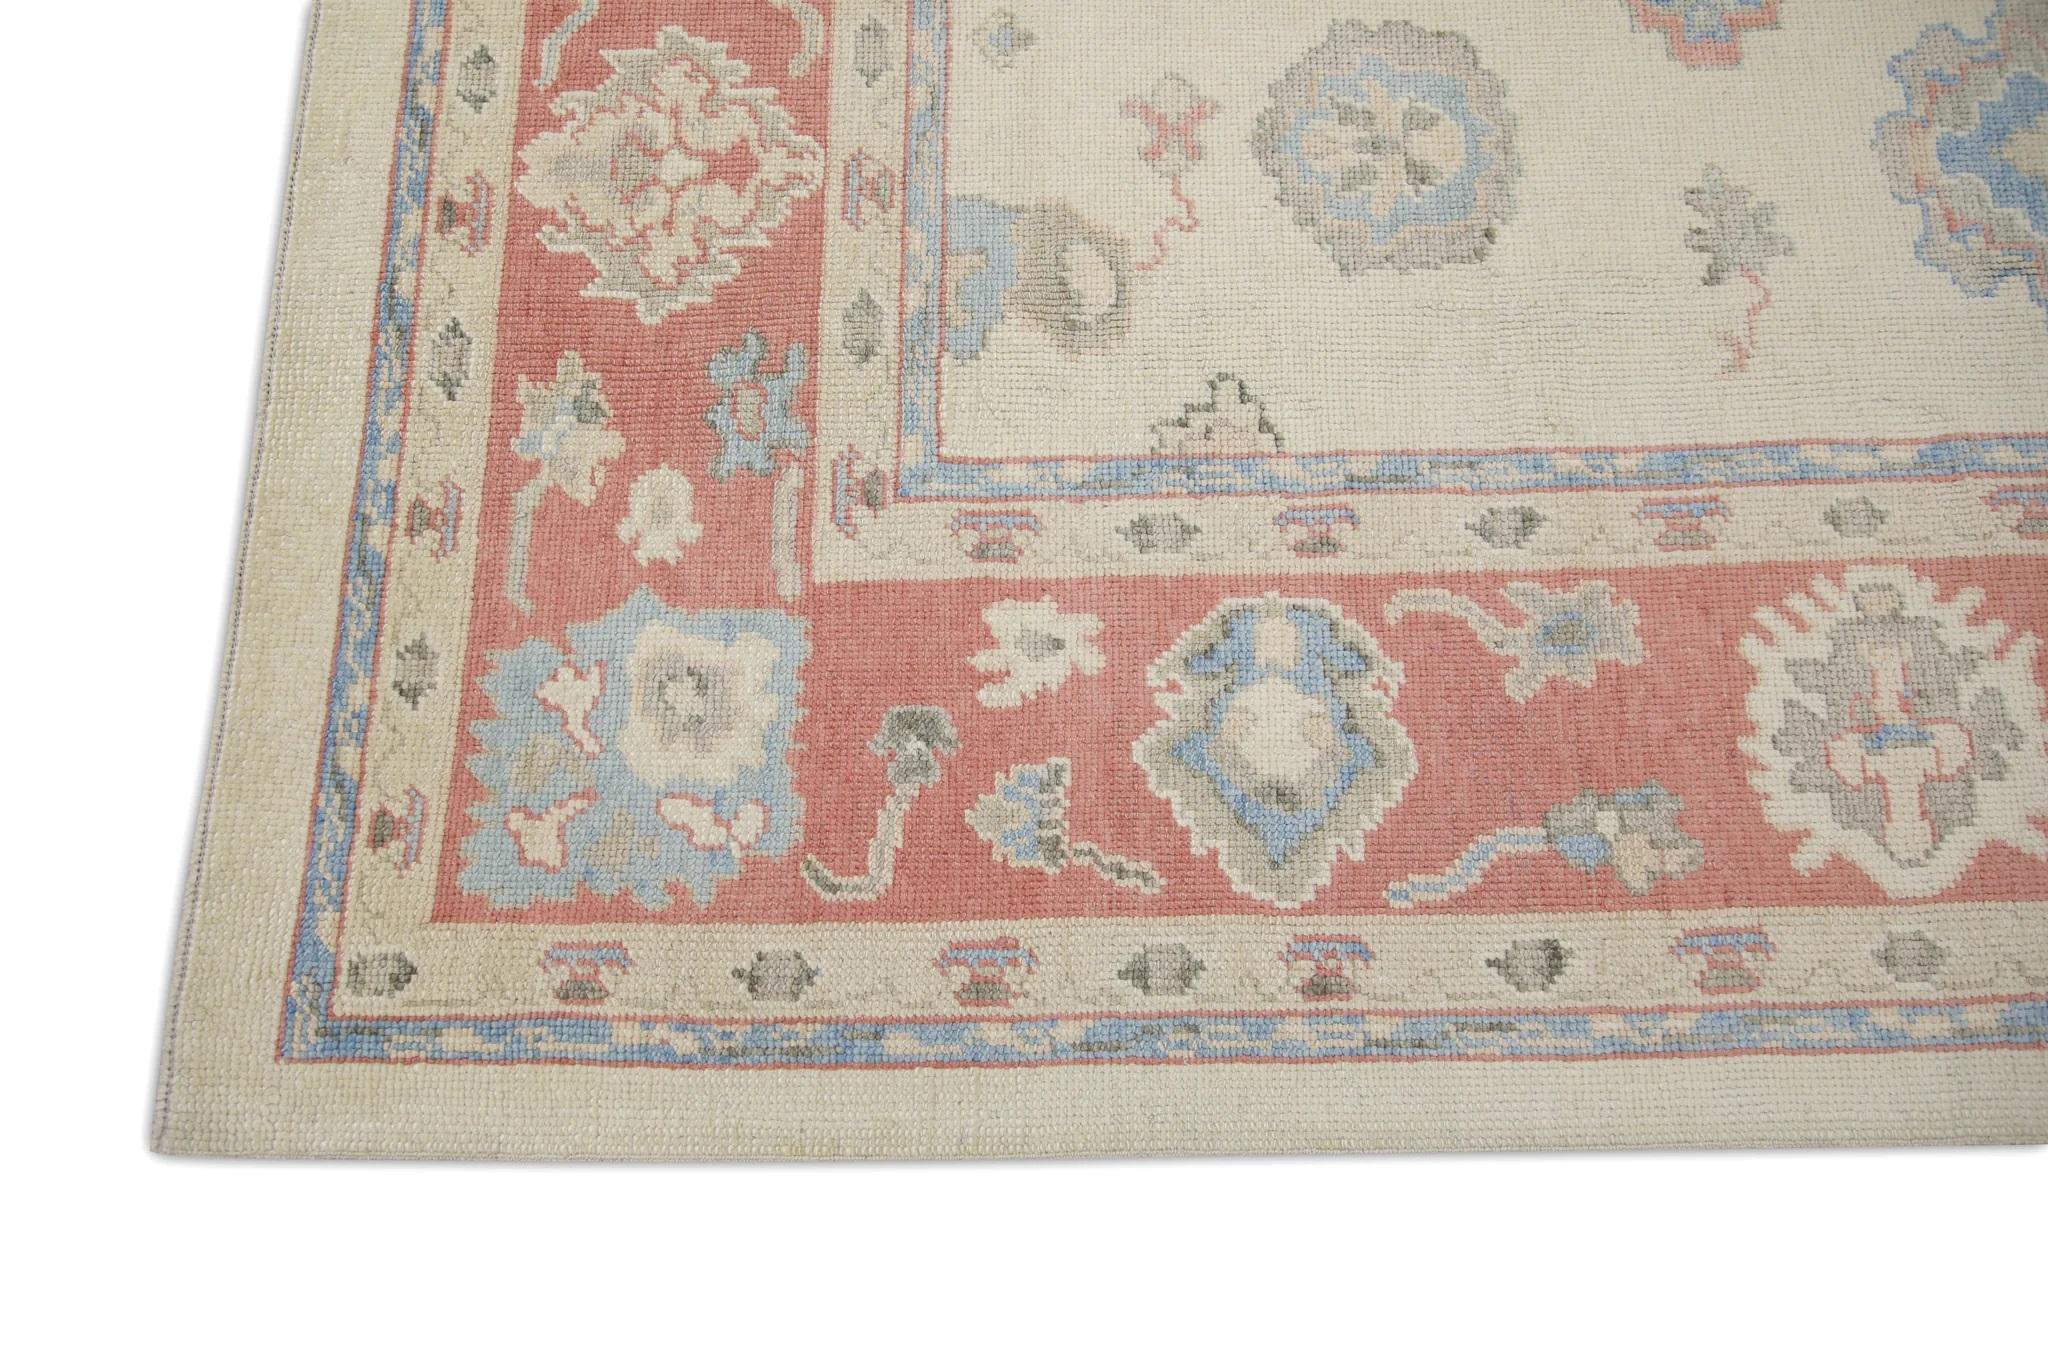 Vegetable Dyed Cream Handwoven Wool Turkish Oushak Rug in Red & Blue Floral Design 8'3